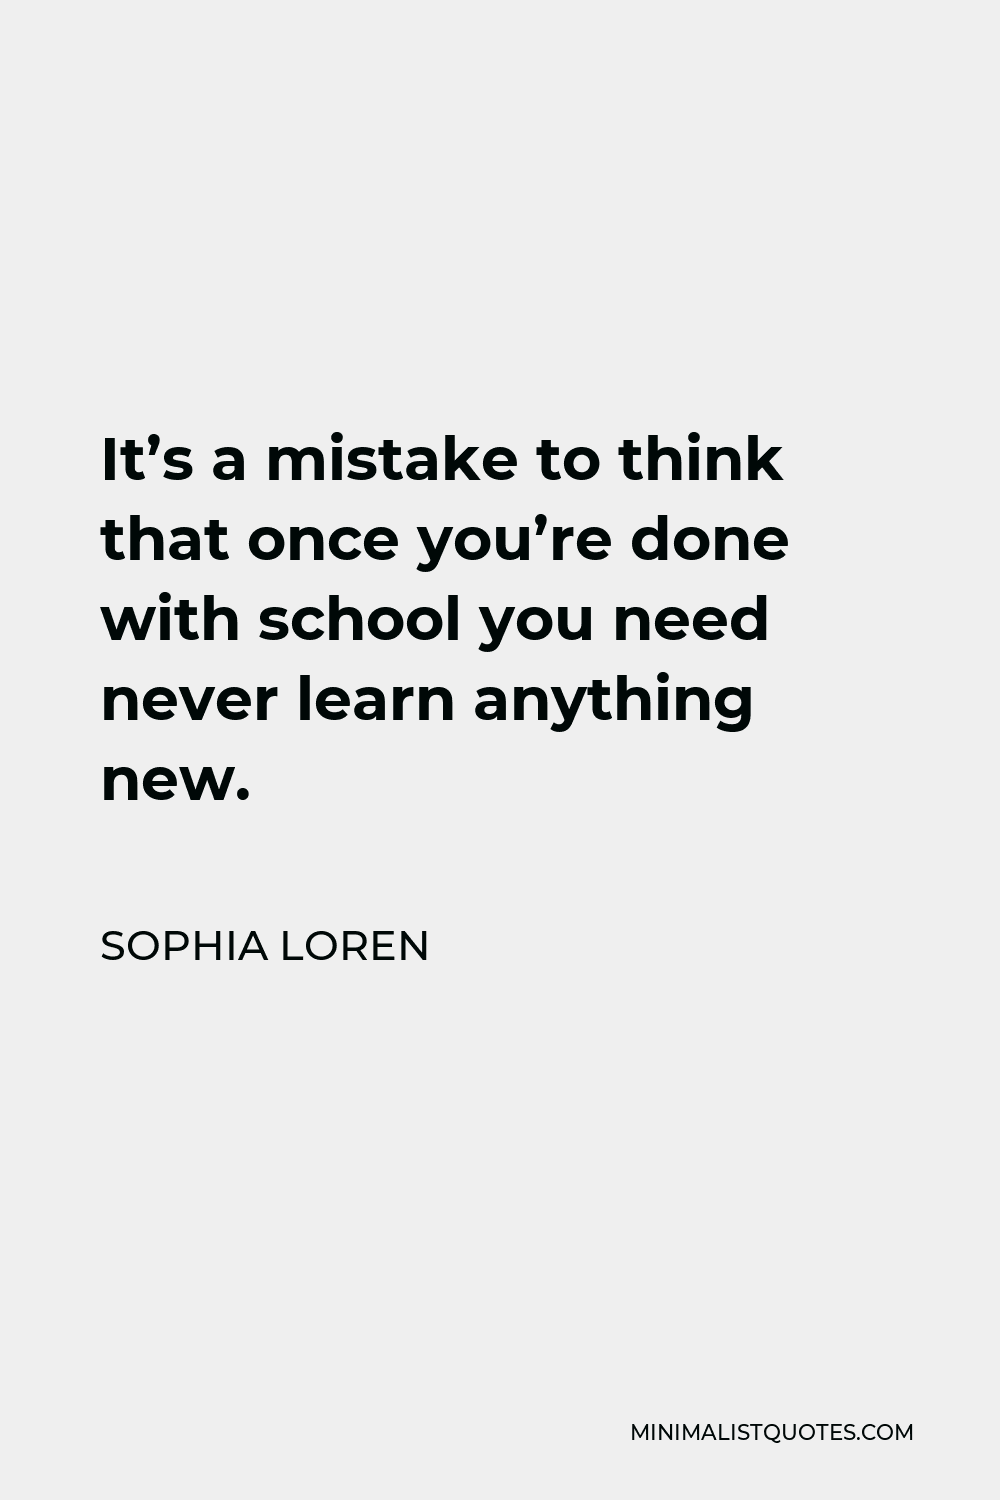 Sophia Loren Quote - It’s a mistake to think that once you’re done with school you need never learn anything new.